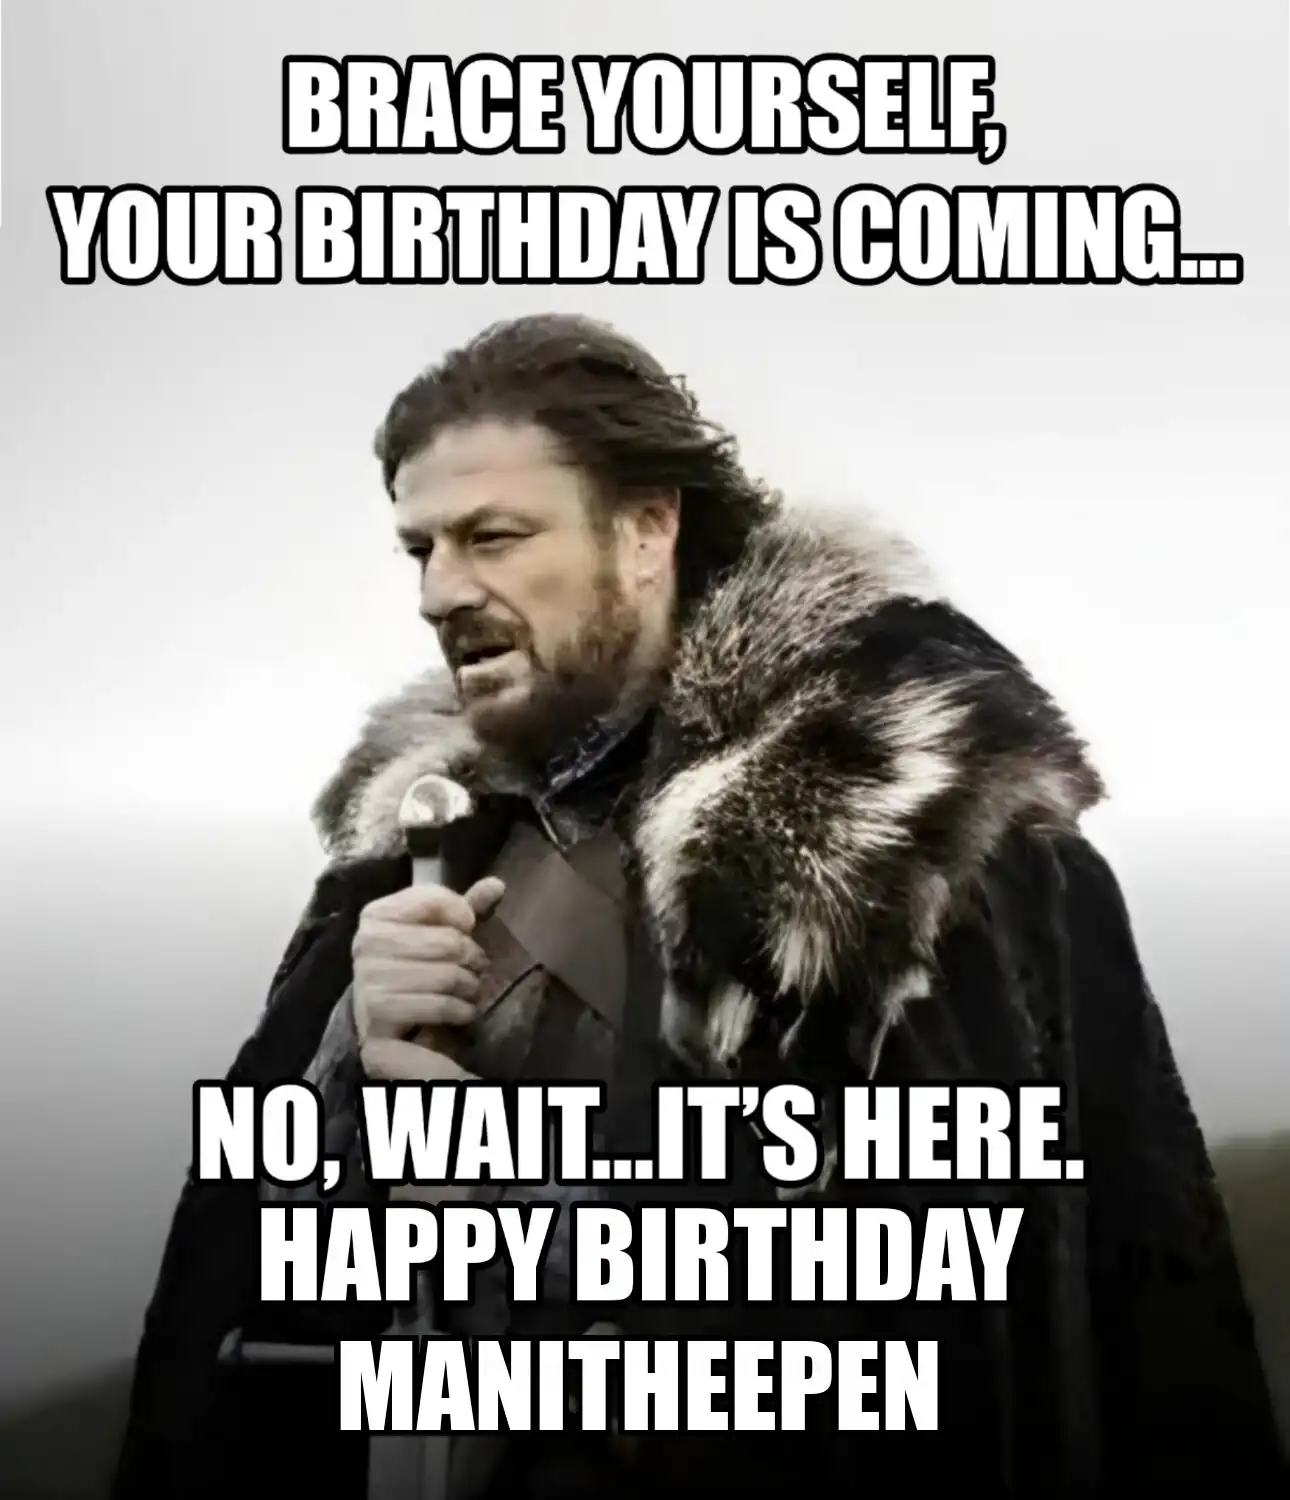 Happy Birthday Manitheepen Brace Yourself Your Birthday Is Coming Meme